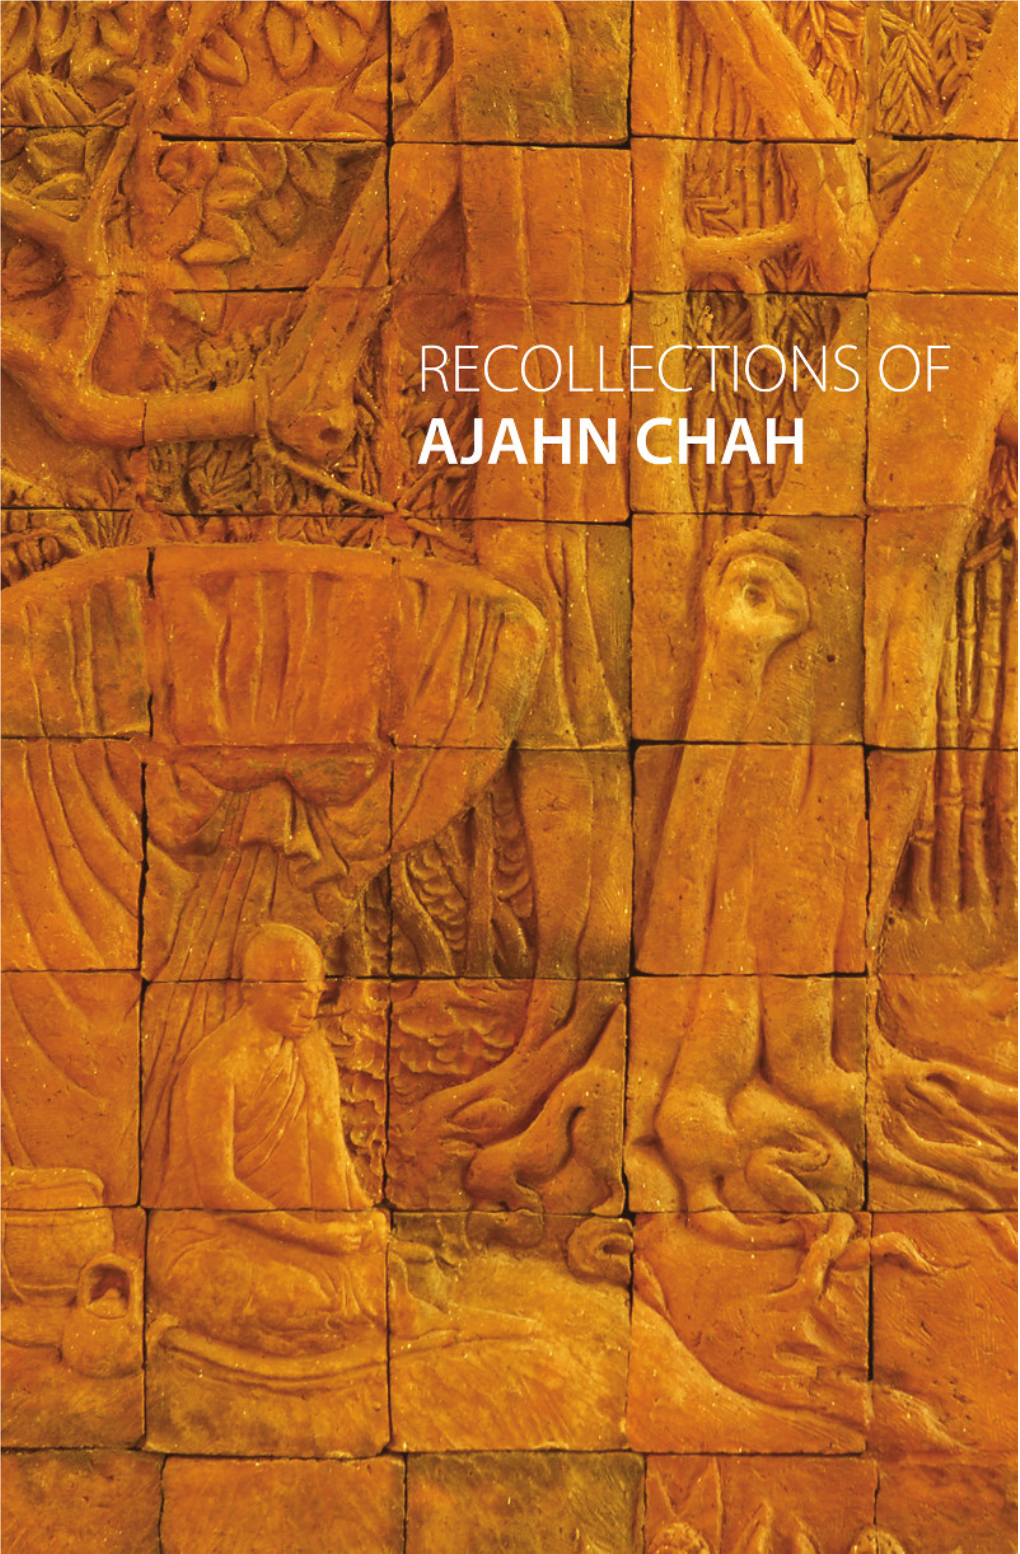 Recollections of Ajahn Chah for Free Distribution Sabbadānaṃ Dhammadānaṃ Jināti the Gift of the Dhamma Surpasses All Other Gifts